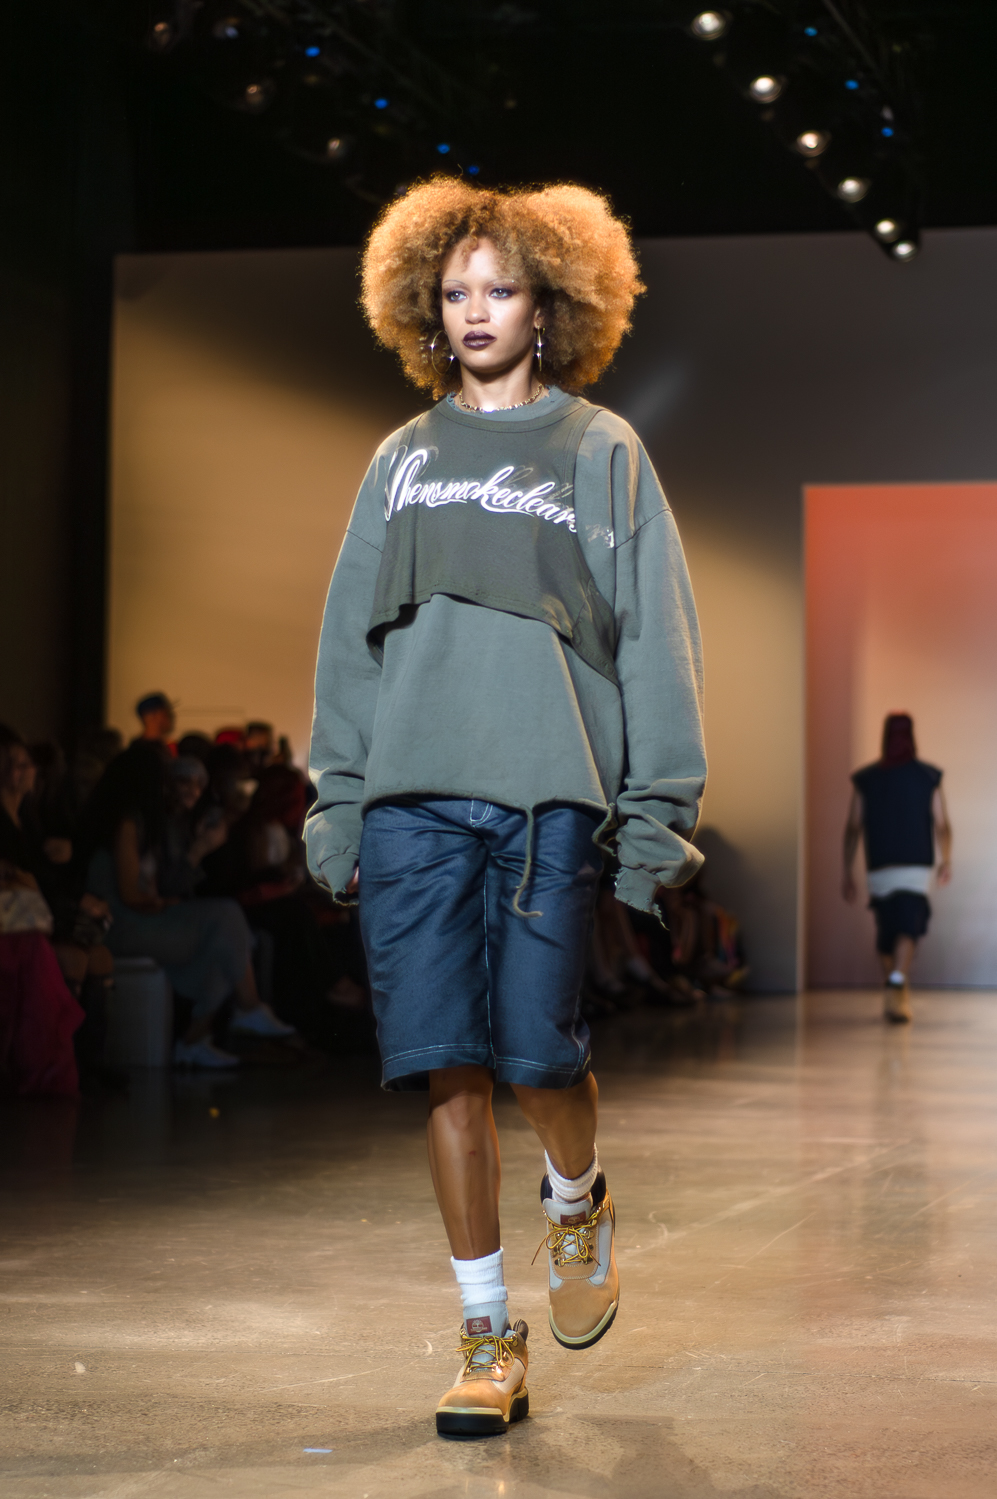 A model wearing a gray sweatshirt with a darker gray tank-top over only her chest with white text on it, and denim capris walks on a runway. The model wears big, gold-colored hoop earrings, a brown almost-choker necklace, and brown-and-gray lace-up boots.